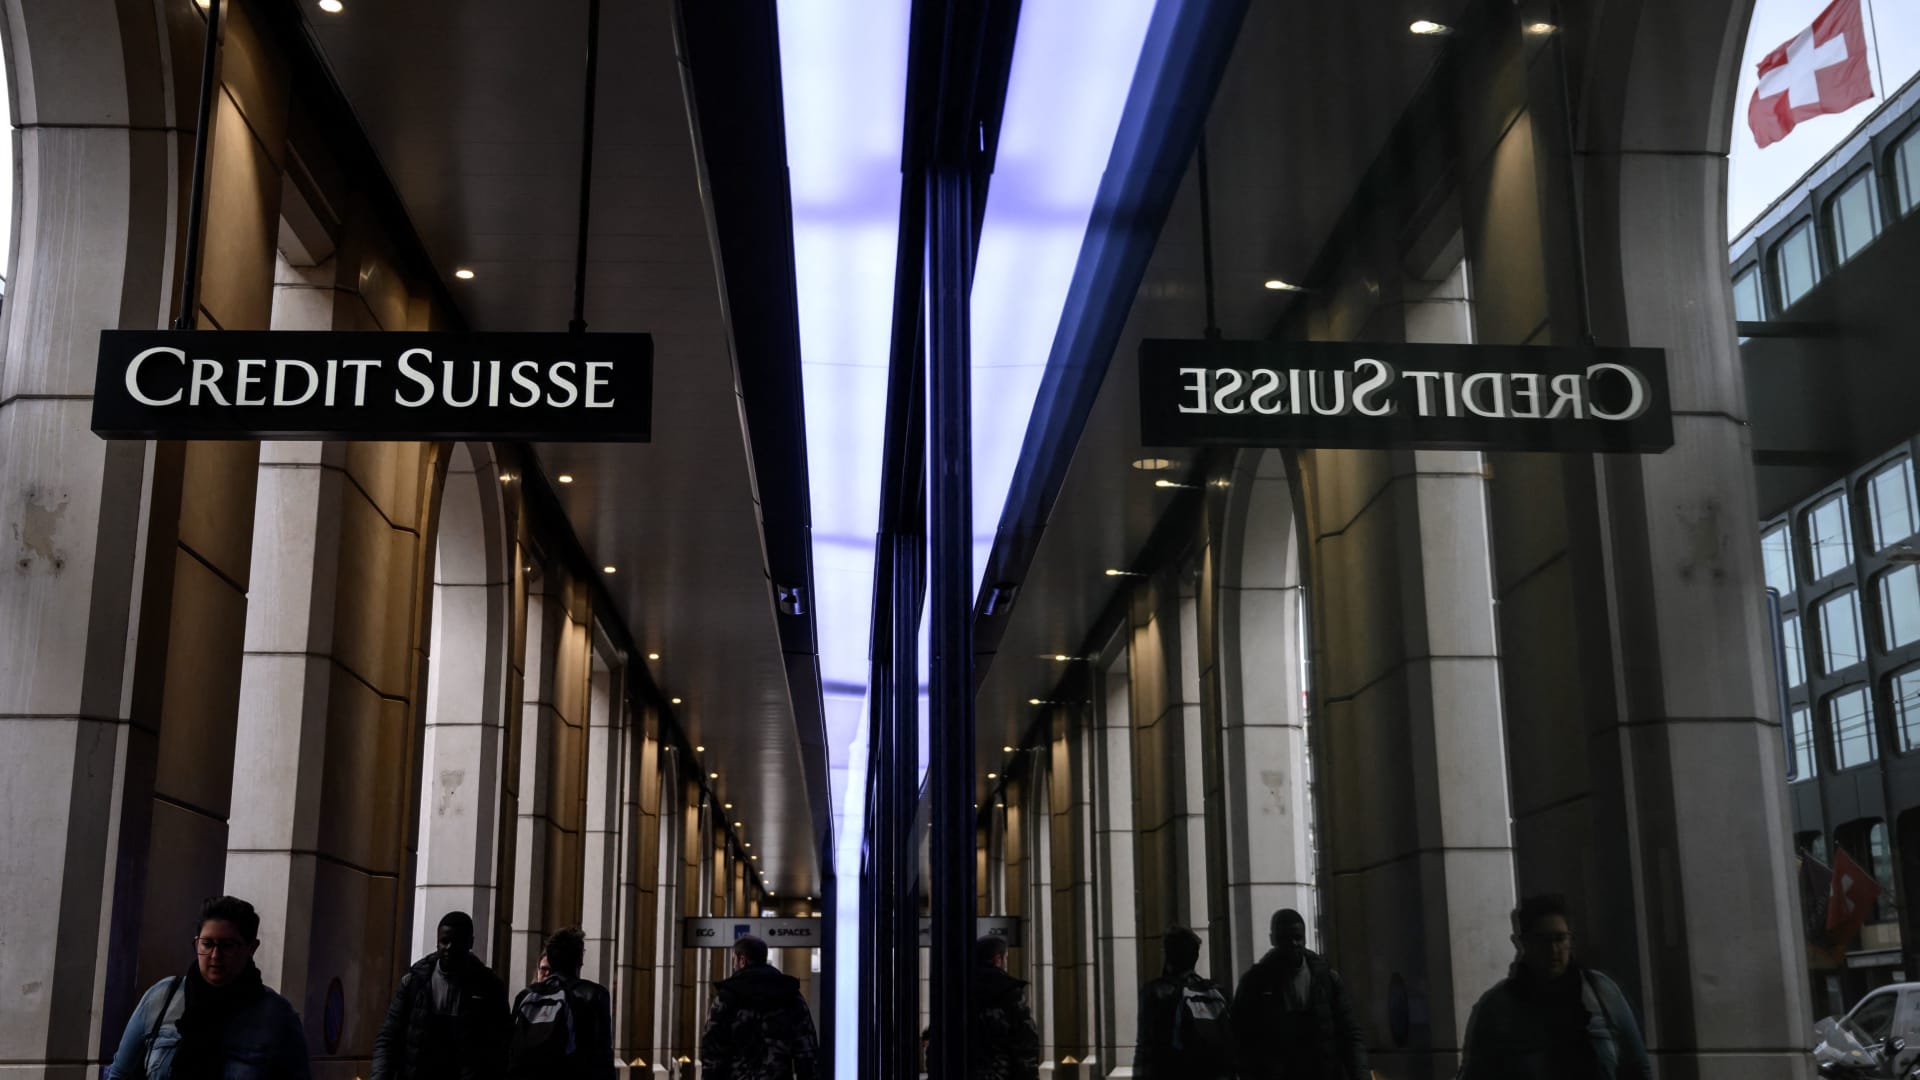 Credit Suisse projects .6 billion fourth-quarter loss as it embarks on strategy overhaul